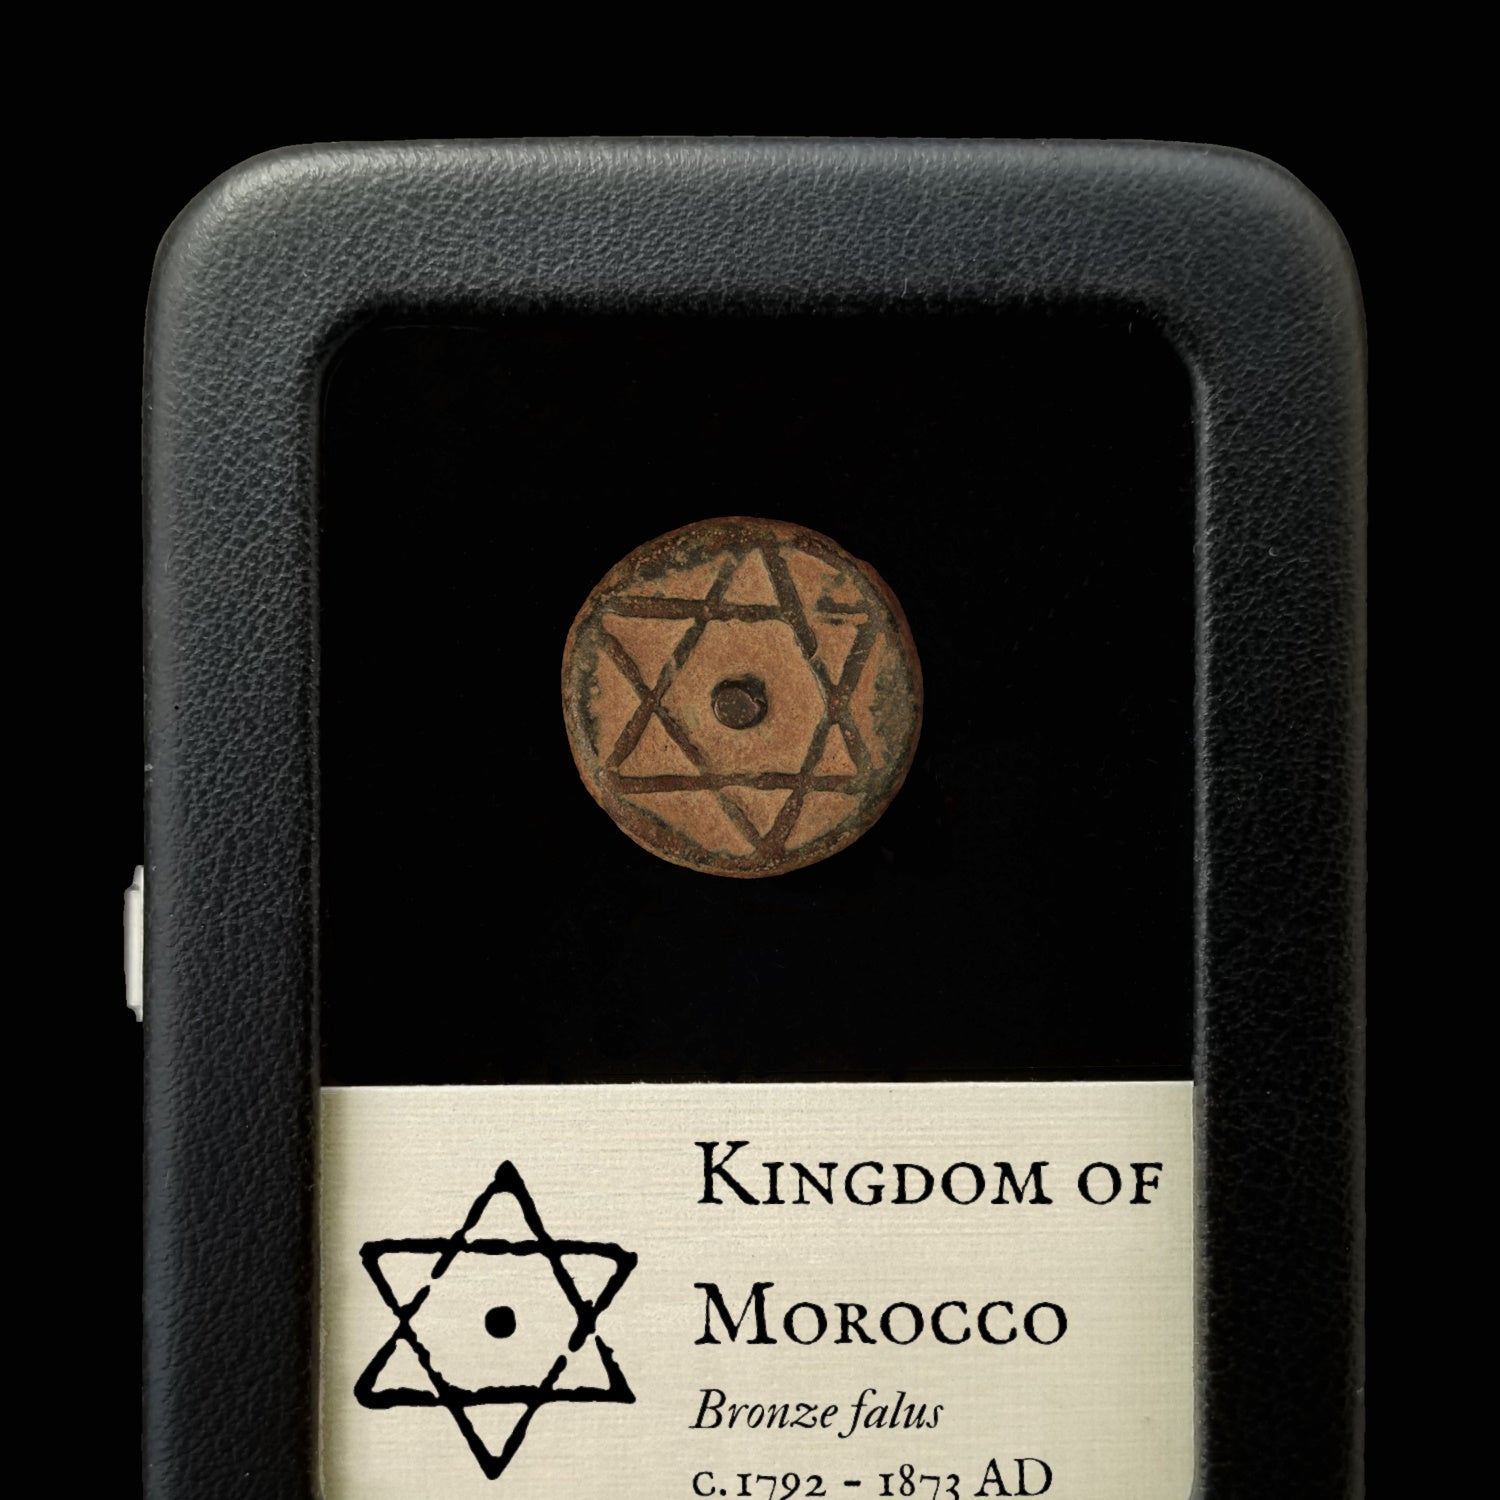 Kingdom of Morocco, Cast Bronze Falus - c. 1792 to 1873 CE - North Africa